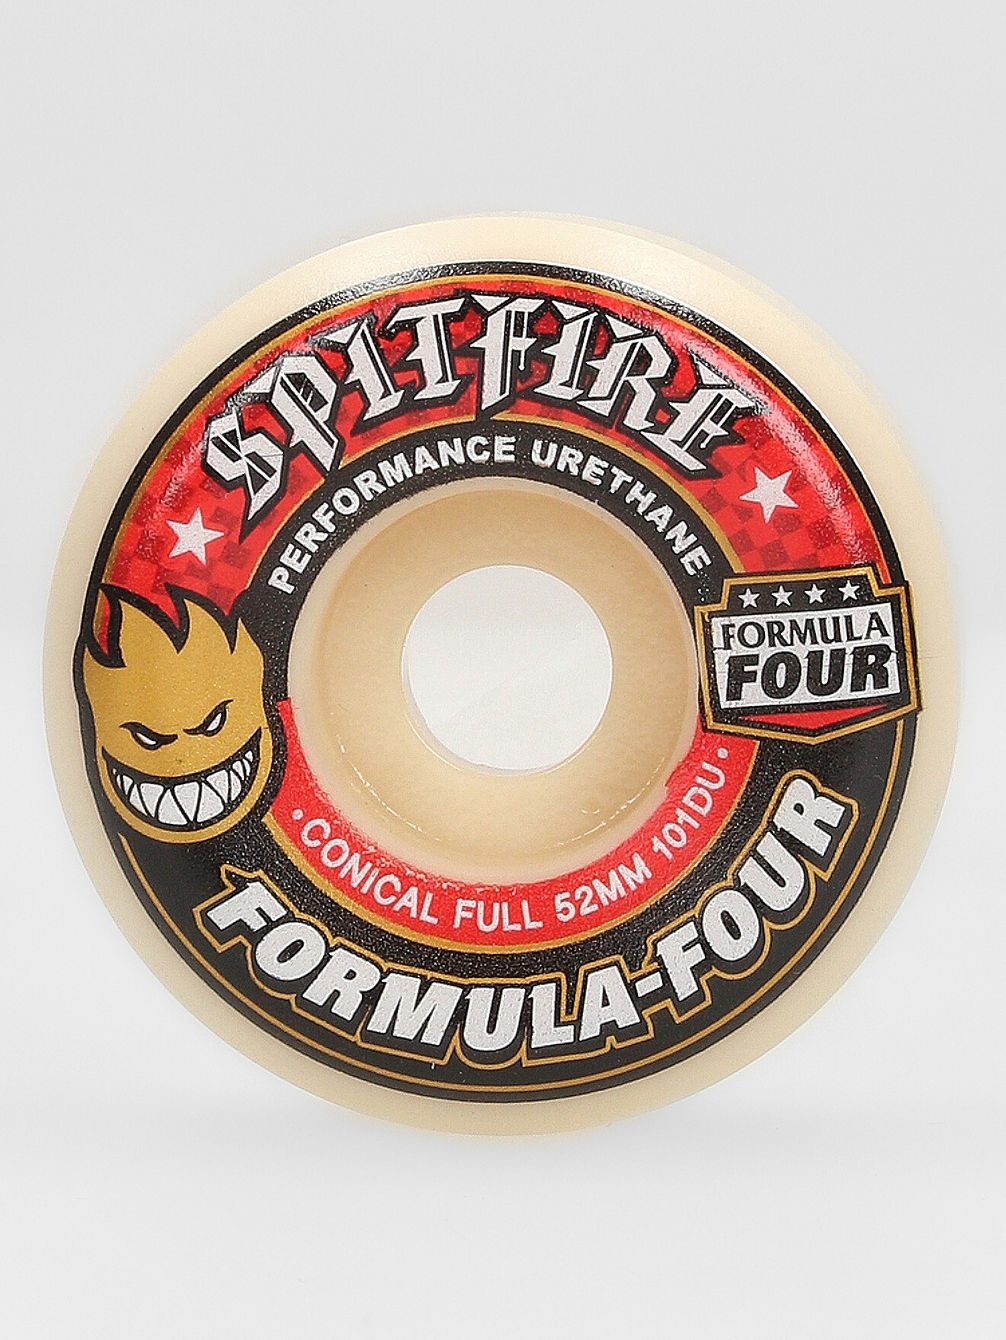 Formula 4 101D Conical Full 52mm Ruote